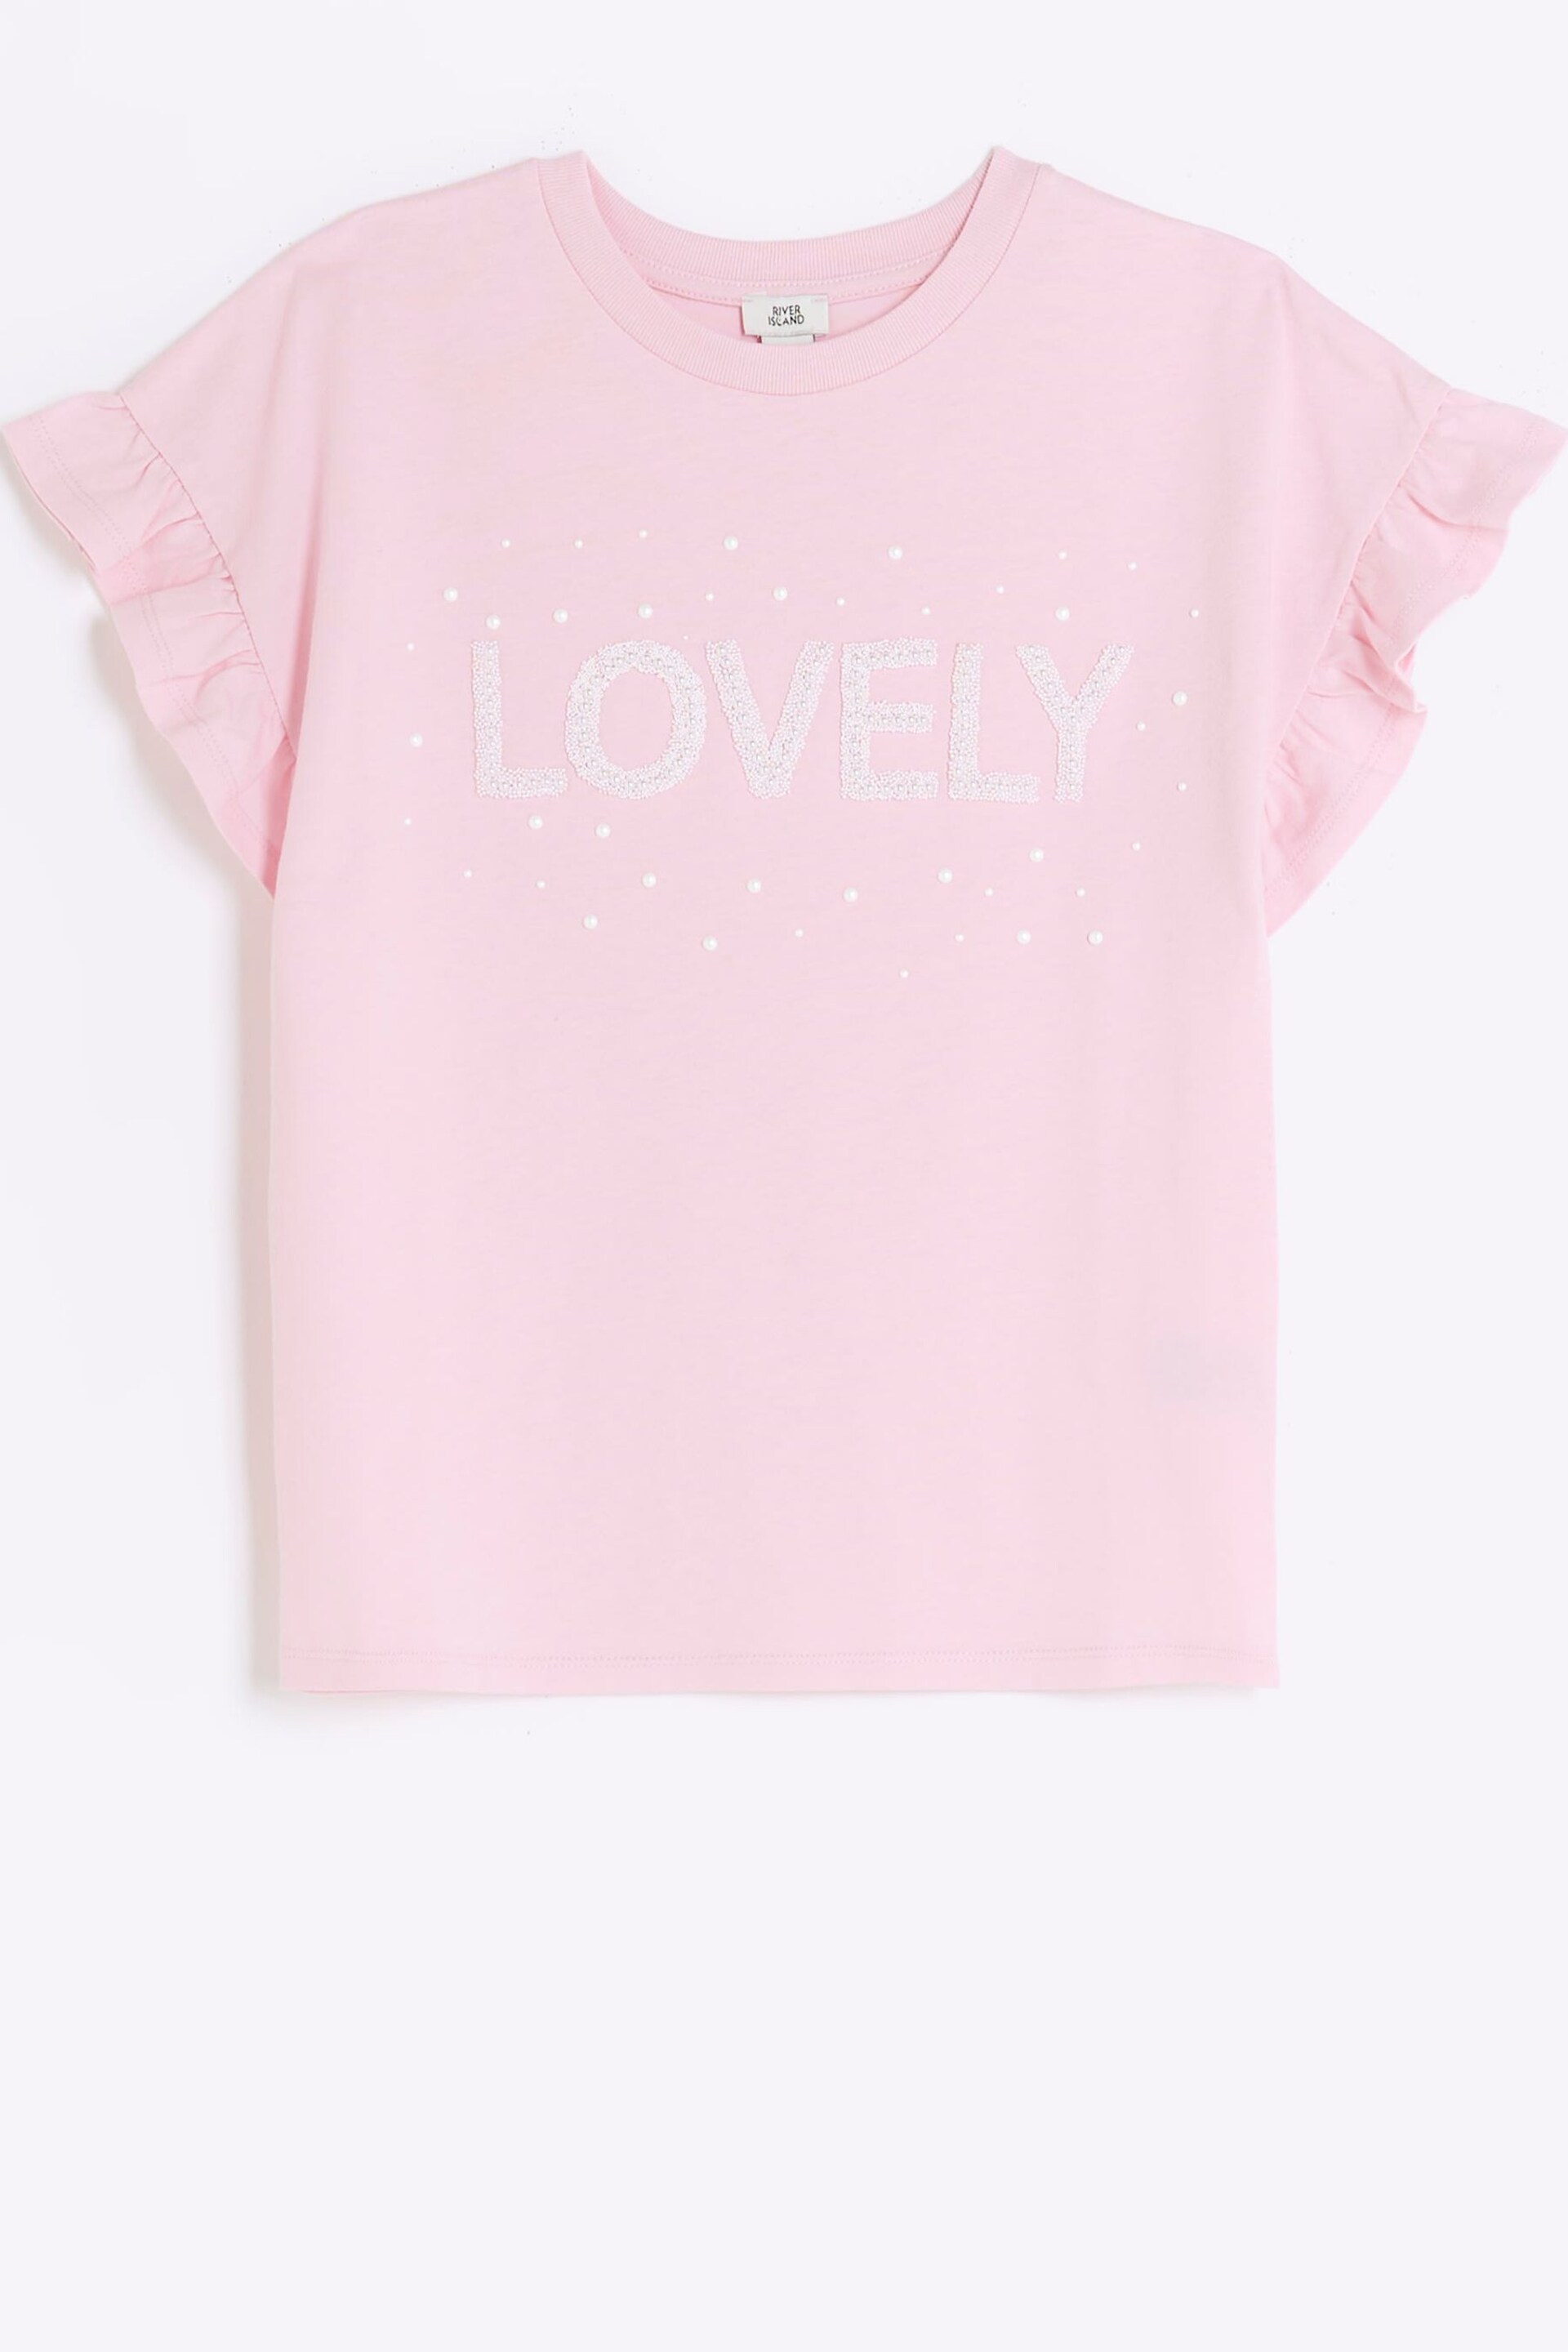 River Island Pink Girls Lovely Graphic T-Shirt - Image 2 of 5